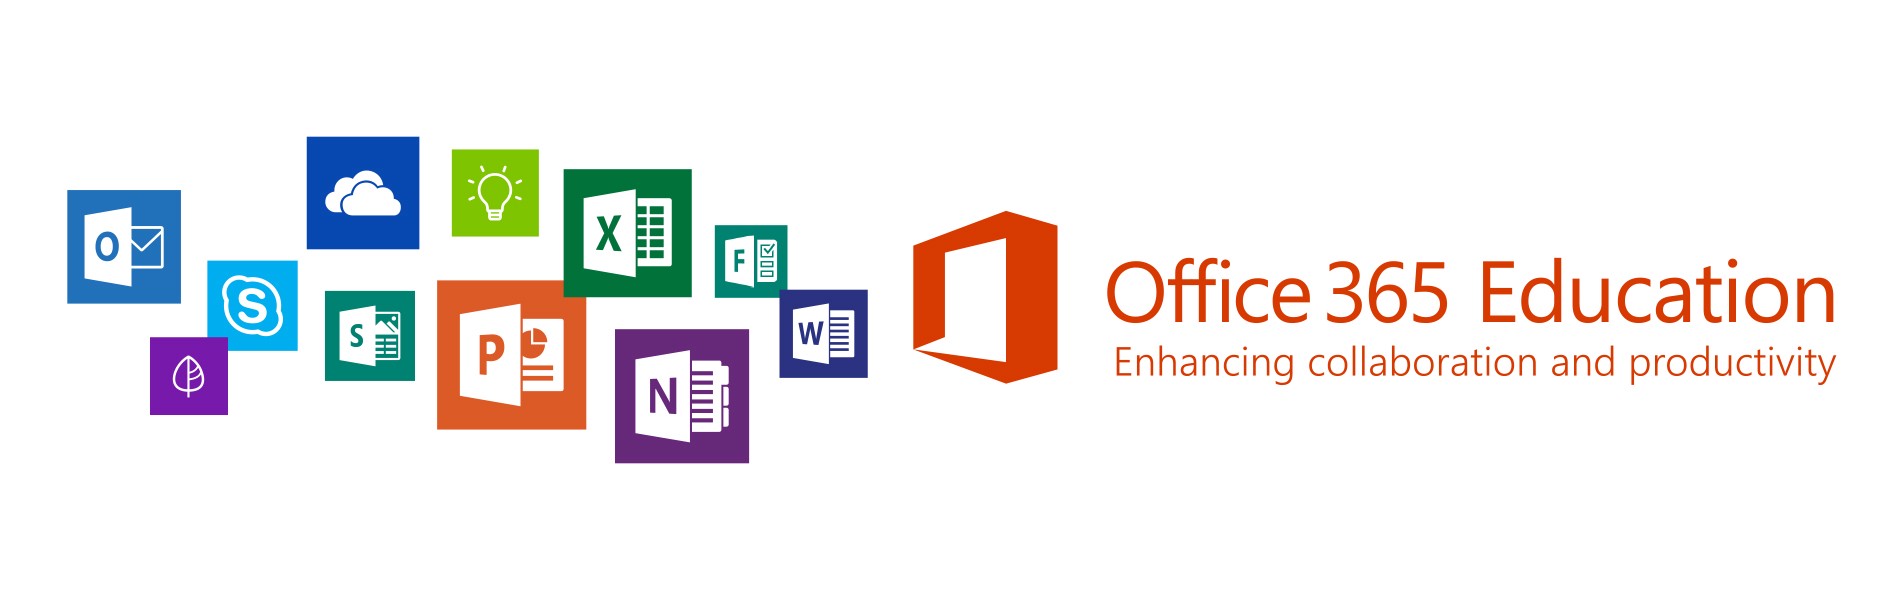 365 student office for Office 365